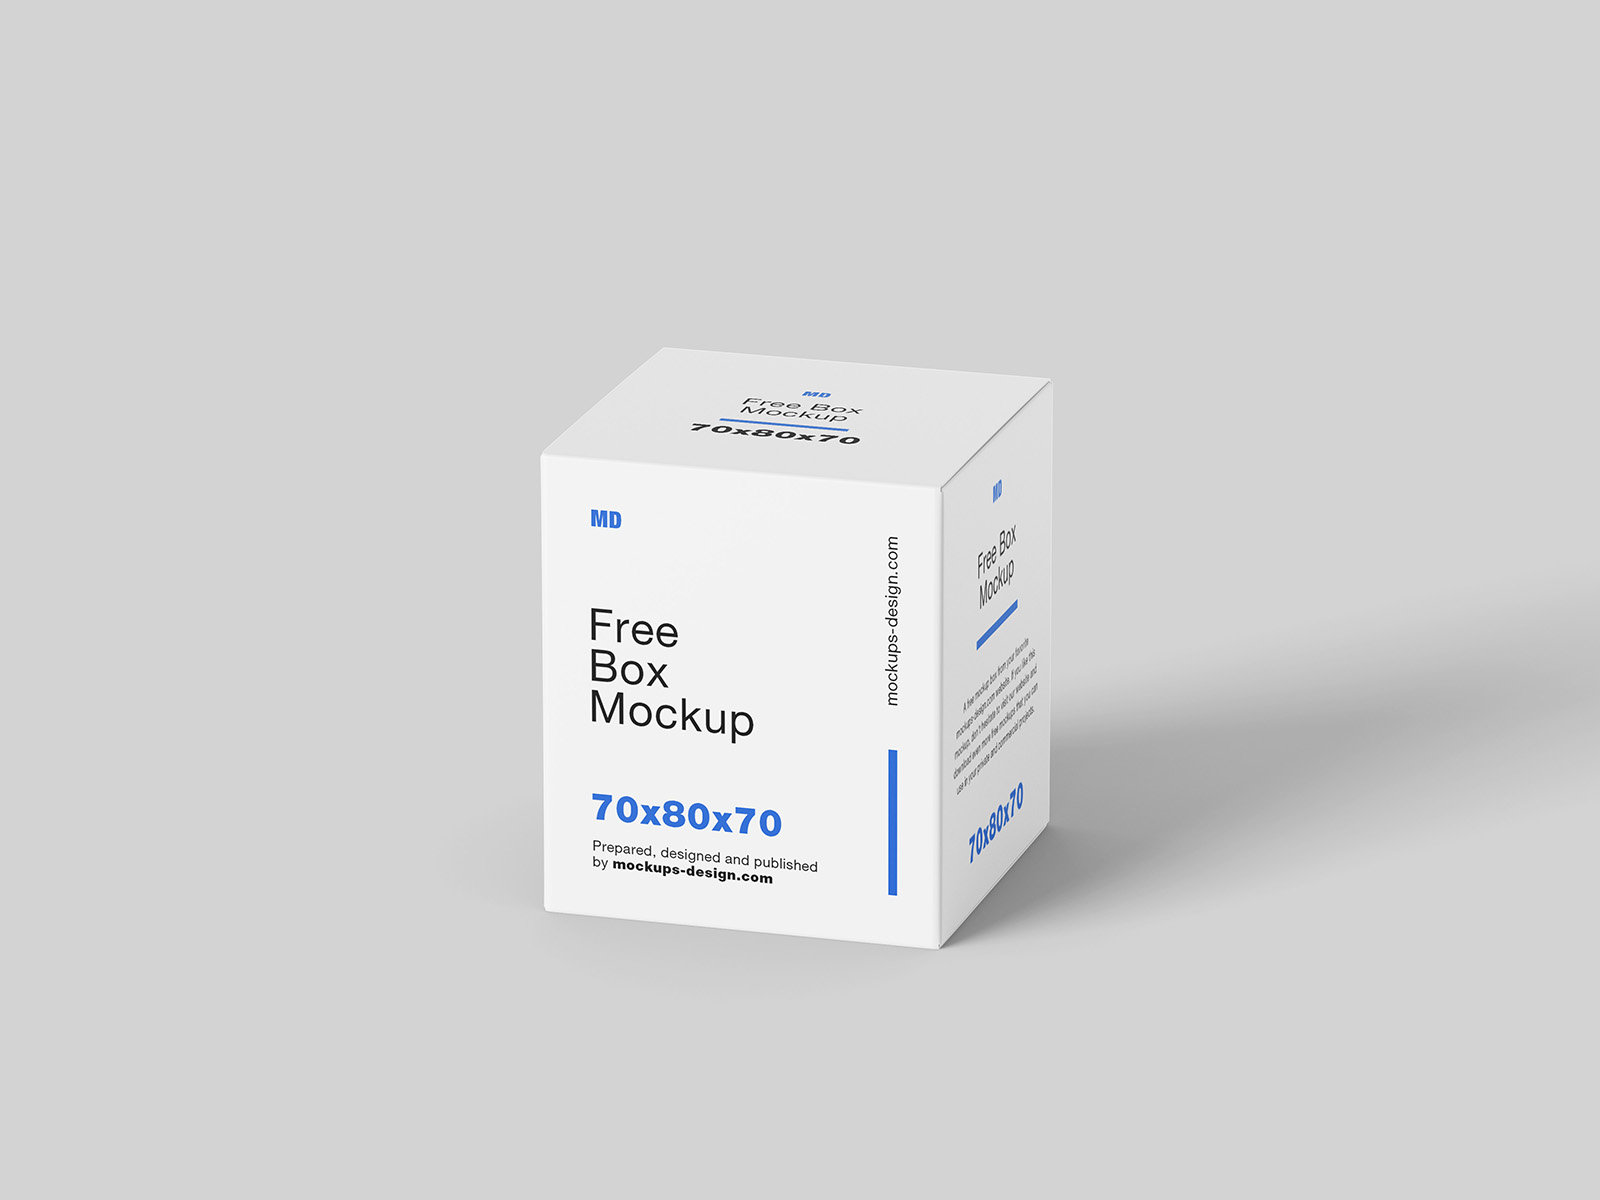 5 Scenes from the Packaging Box Mockup FREE PSD